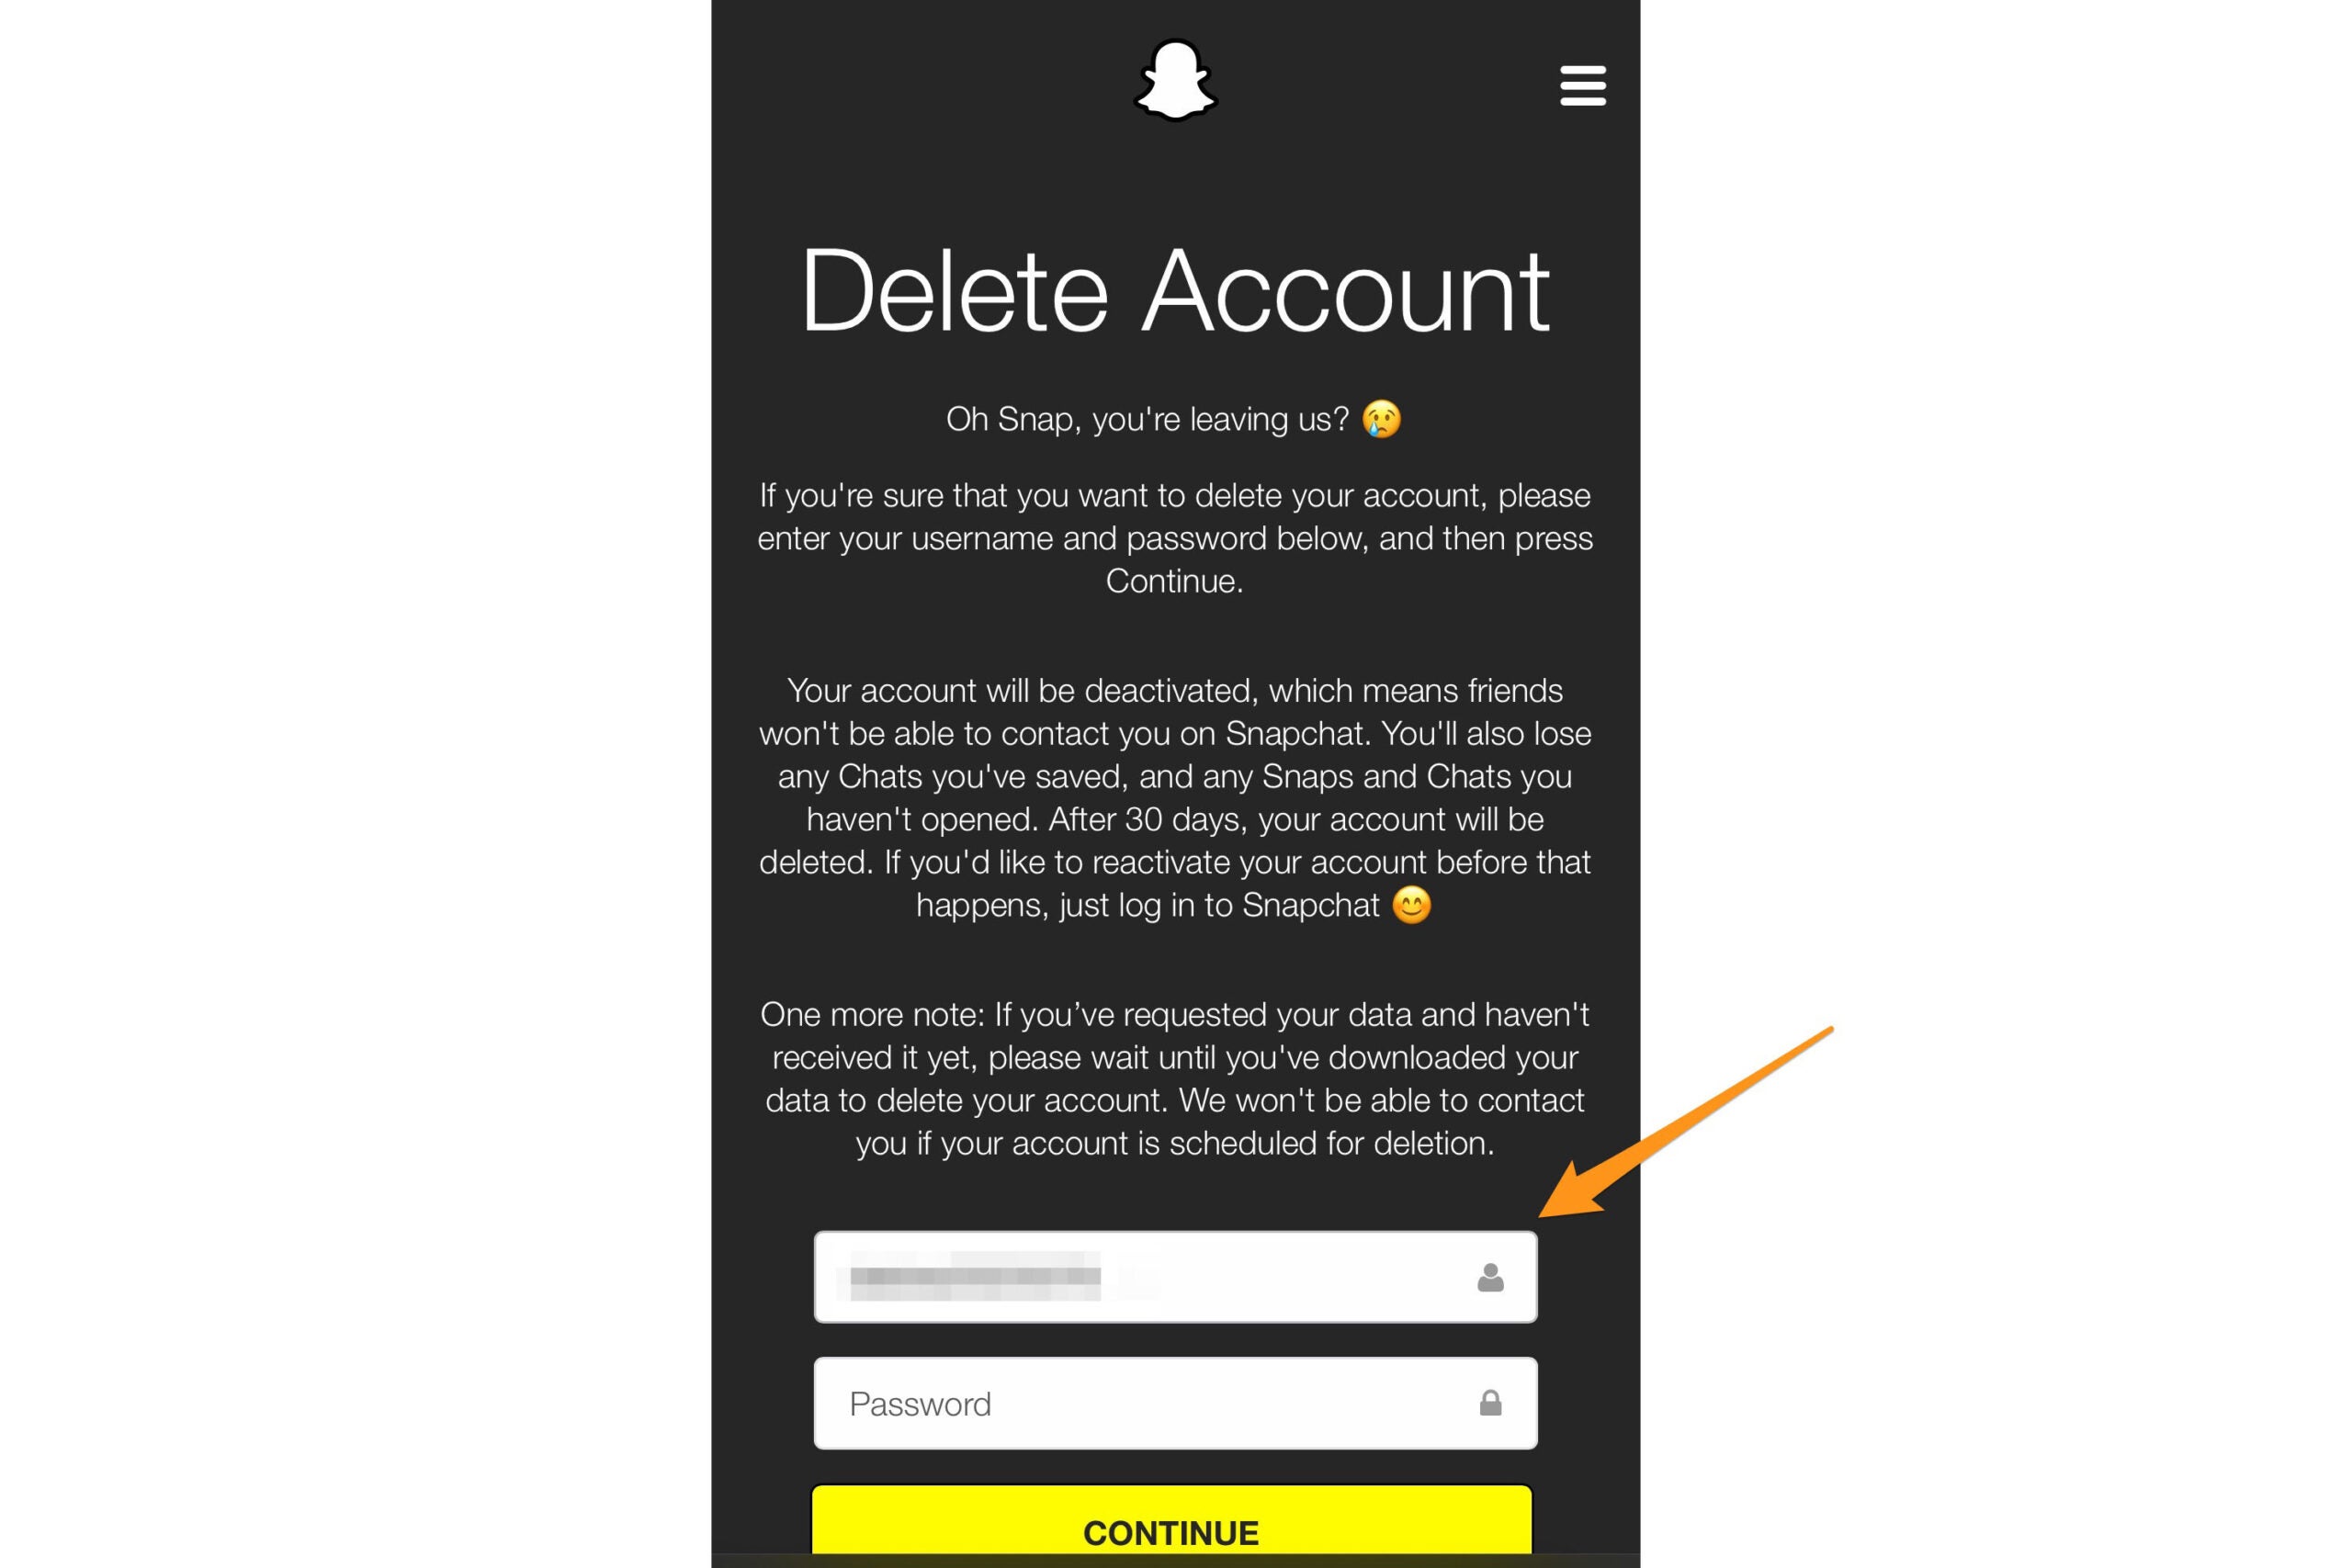 Snapchat's deactivation screen, with information about what it means to delete your Snapchat account.